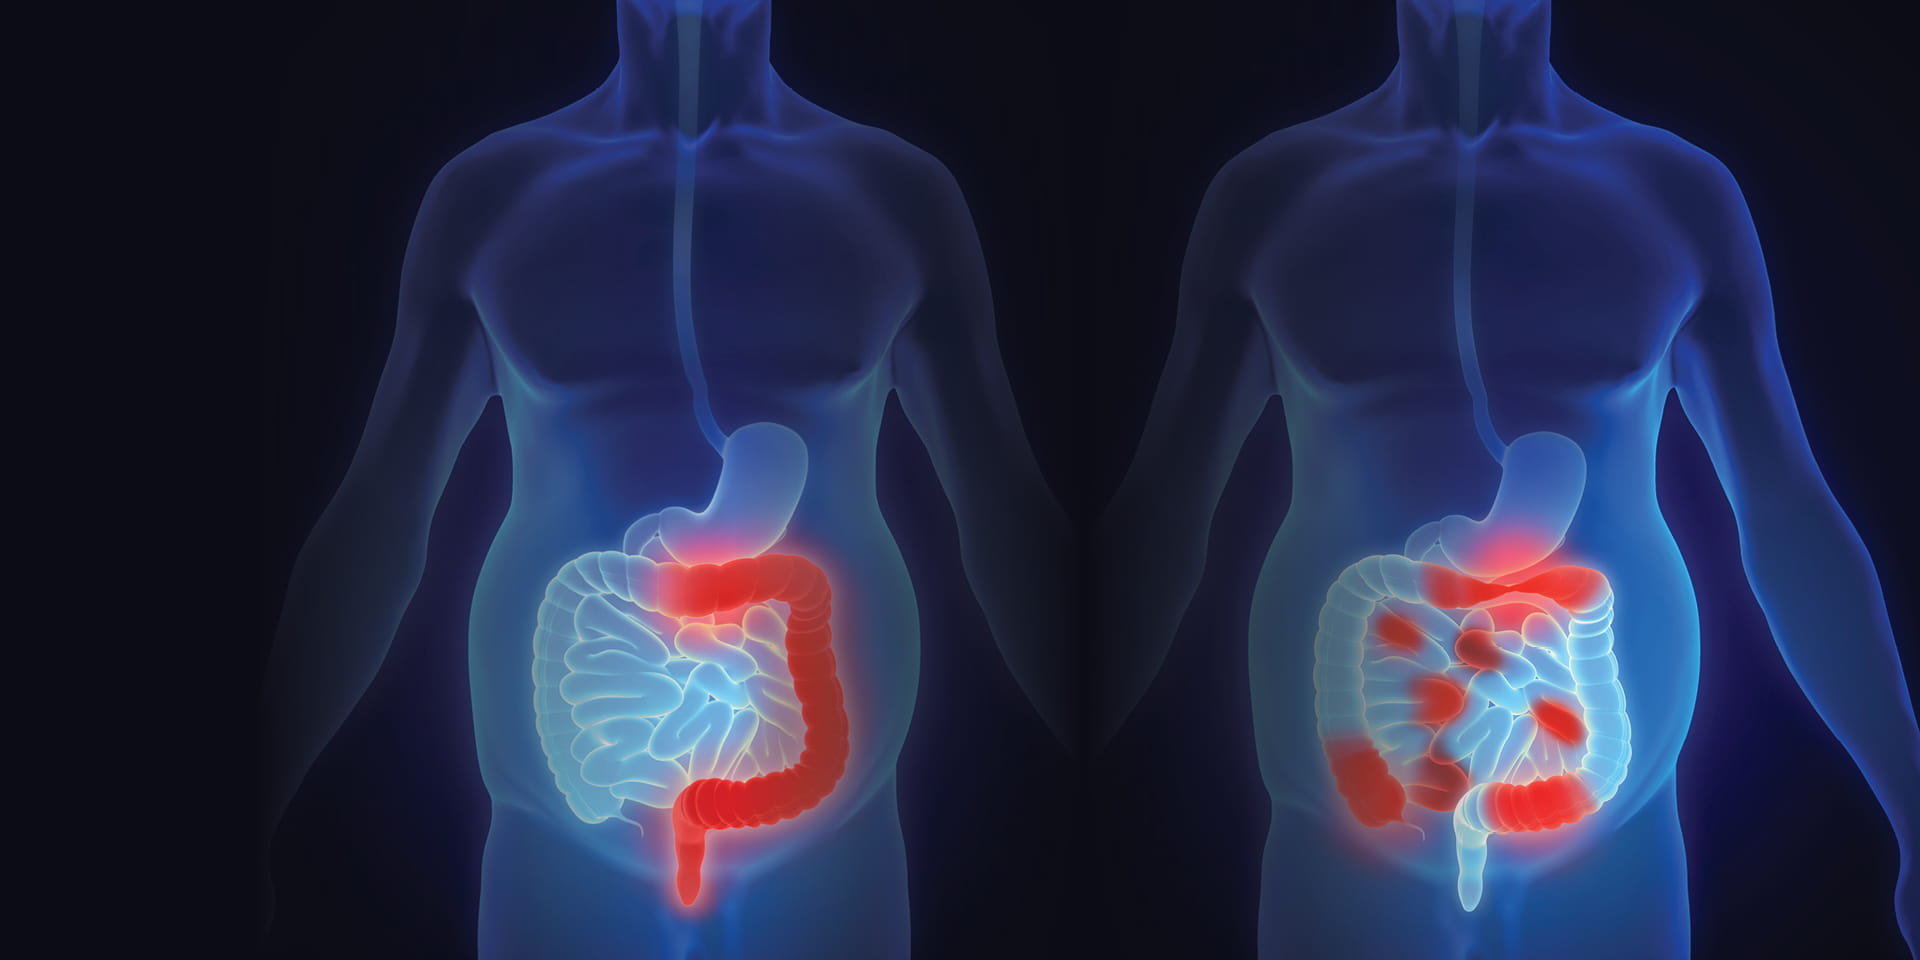 The Crucial Importance of Crohn's Disease and Ulcerative Colitis